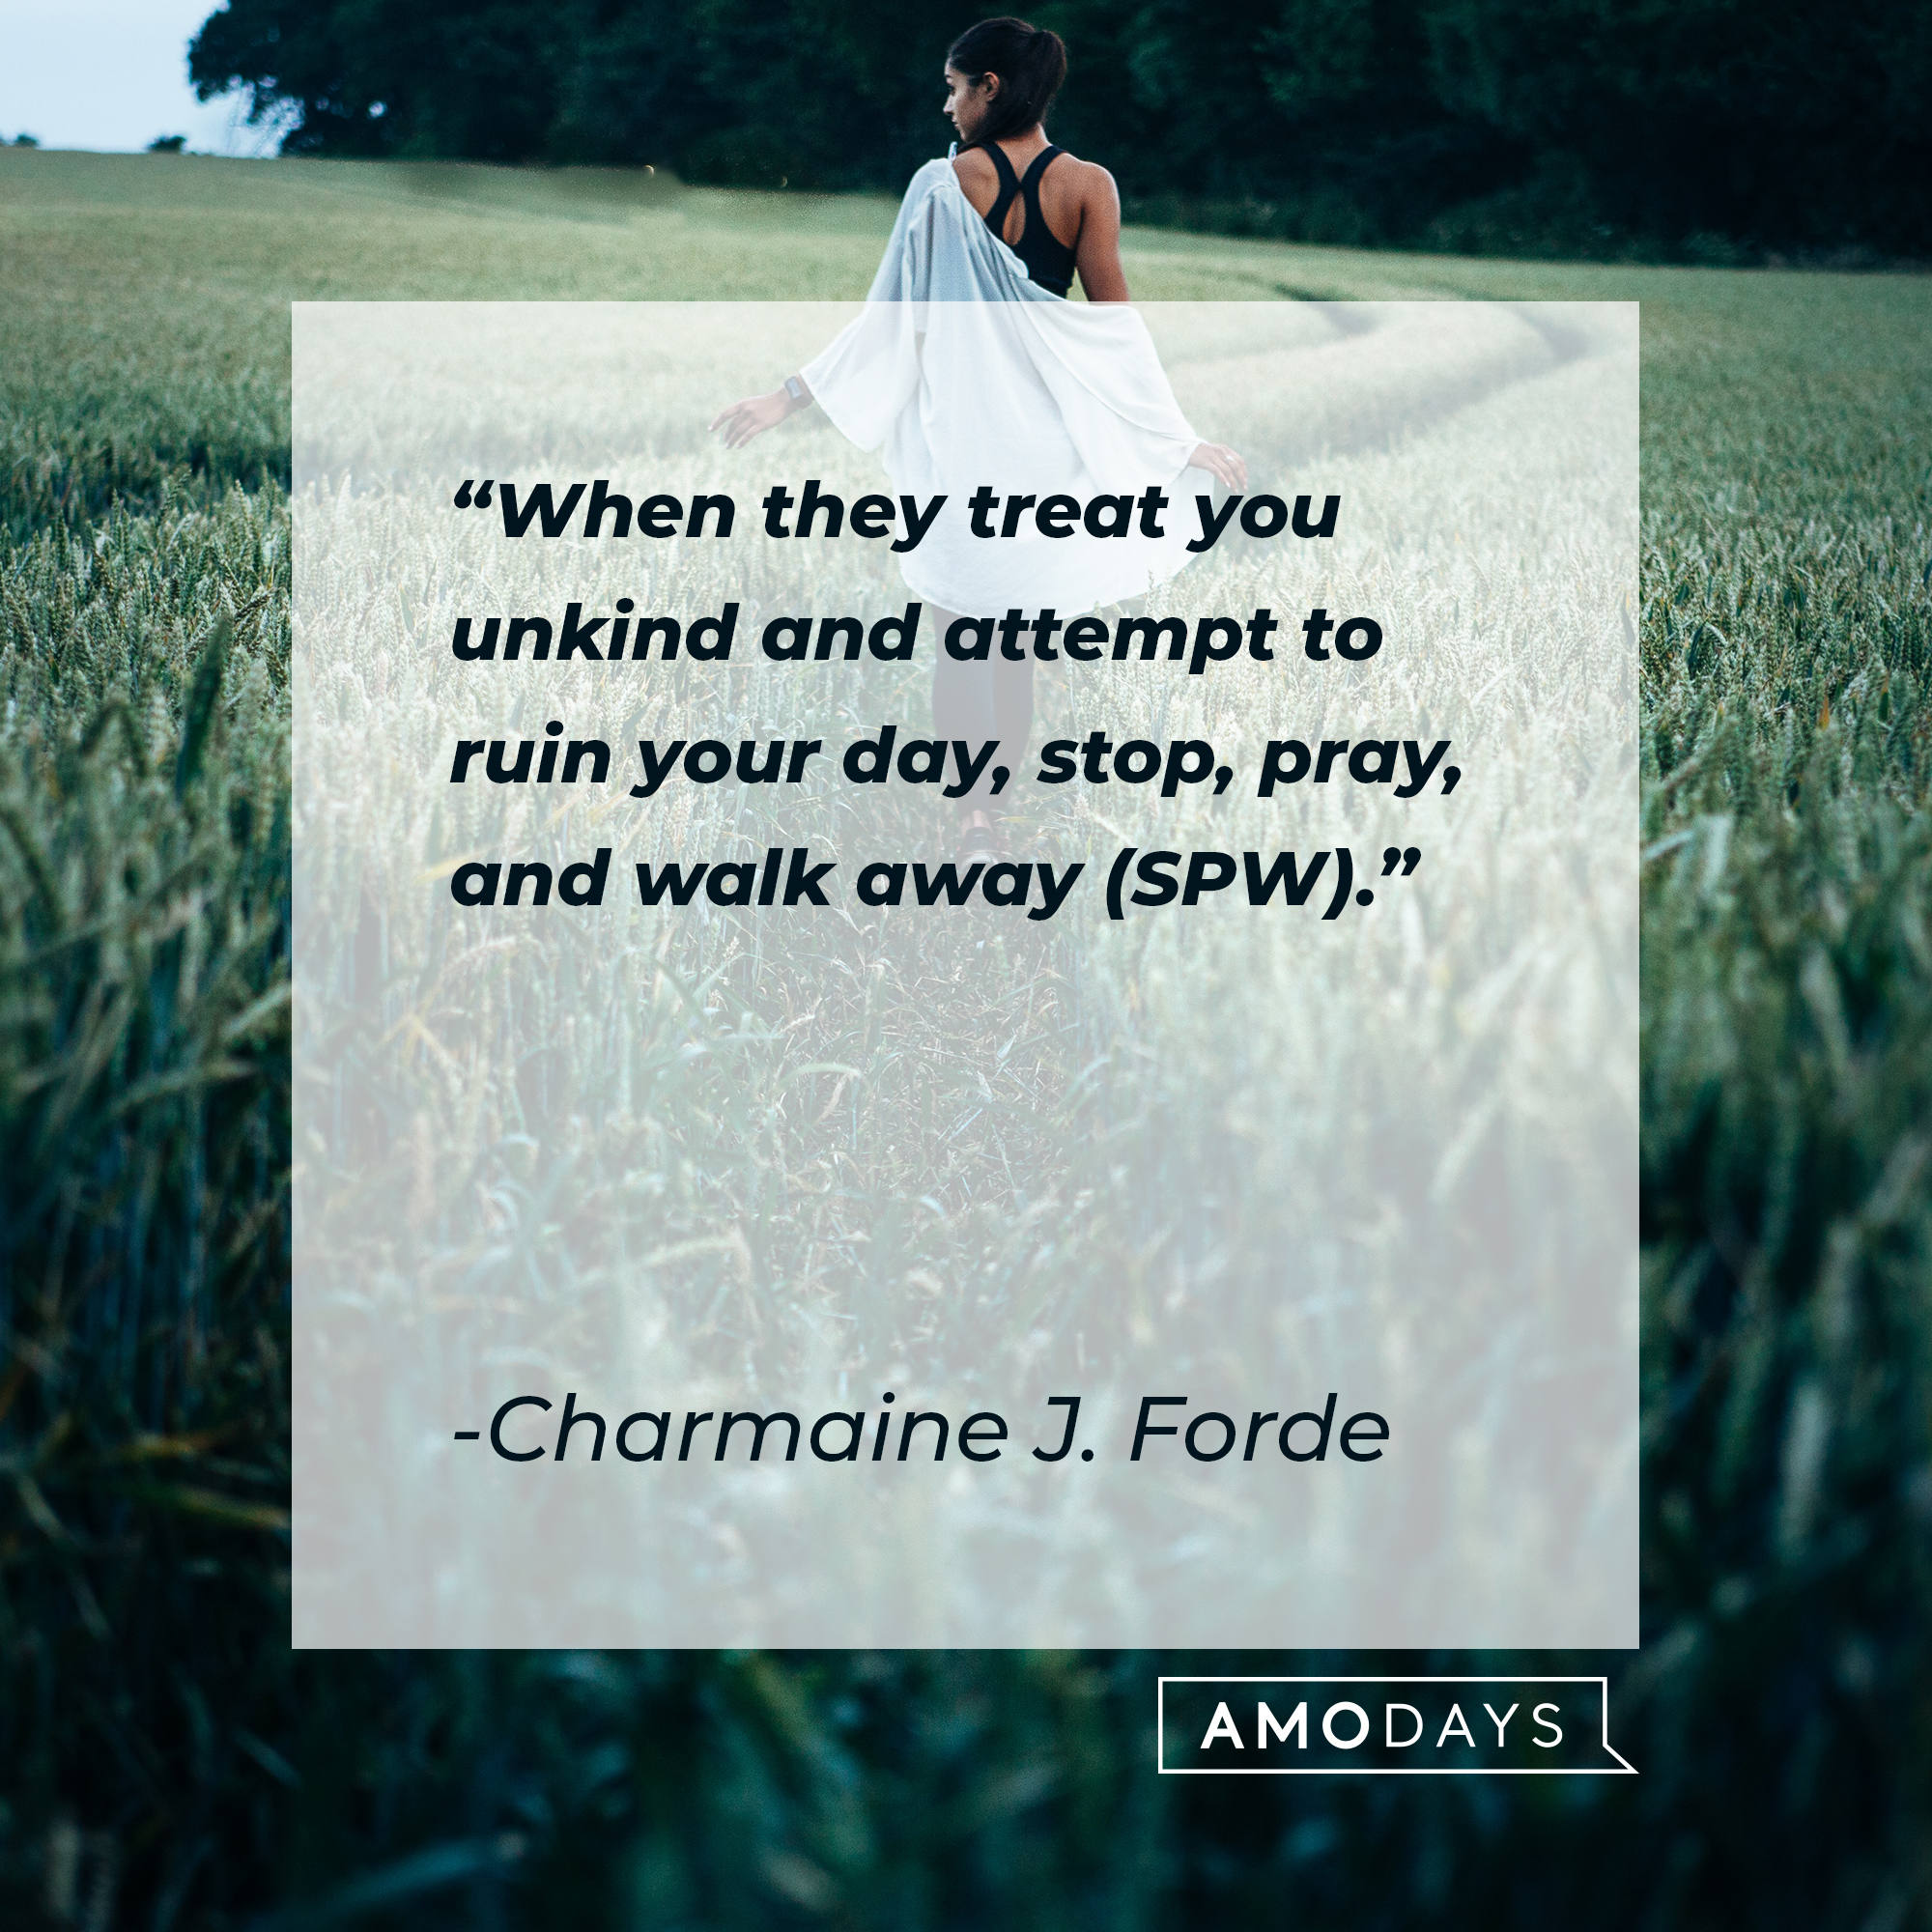 Charmaine J. Forde's quote: "When they treat you unkind and attempt to ruin your day, stop, pray, and walk away (SPW)." | Image: Unsplash.com